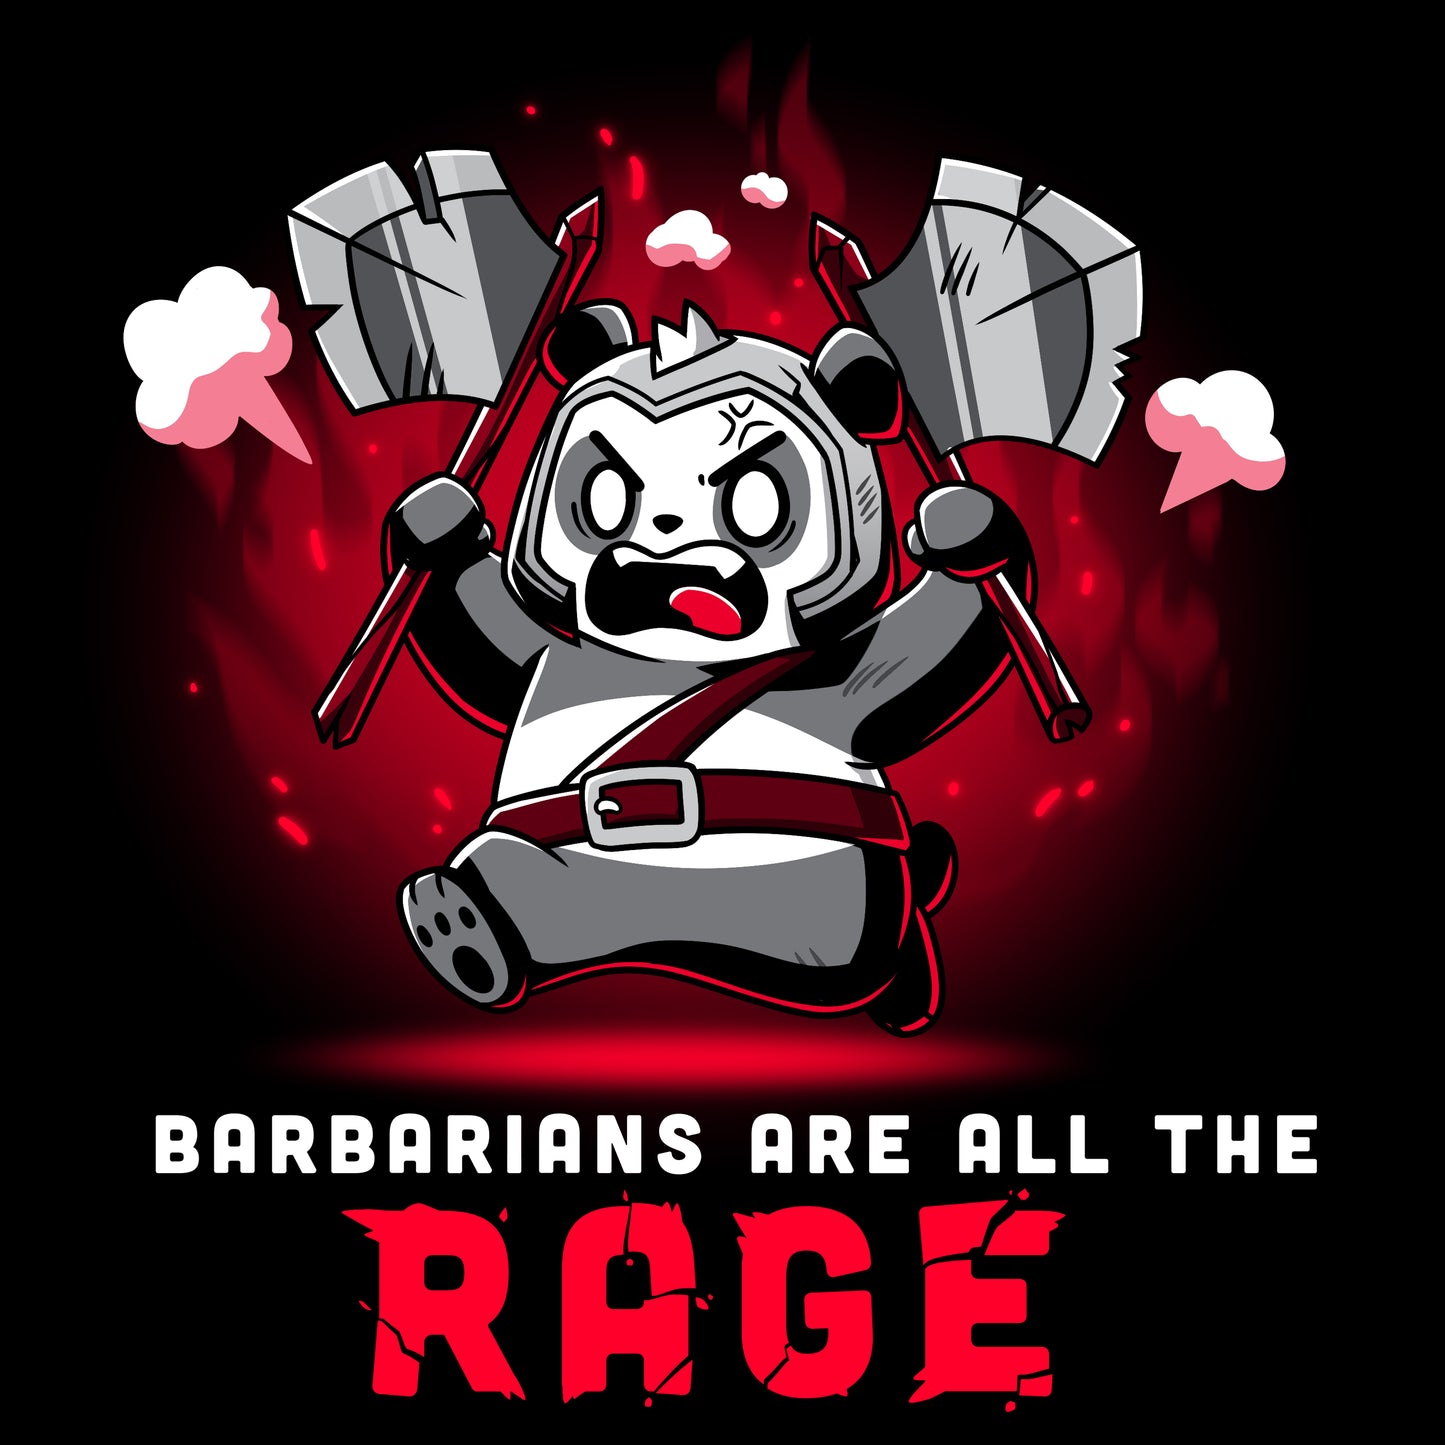 TeeTurtle's "Barbarians are All the Rage" is raging.